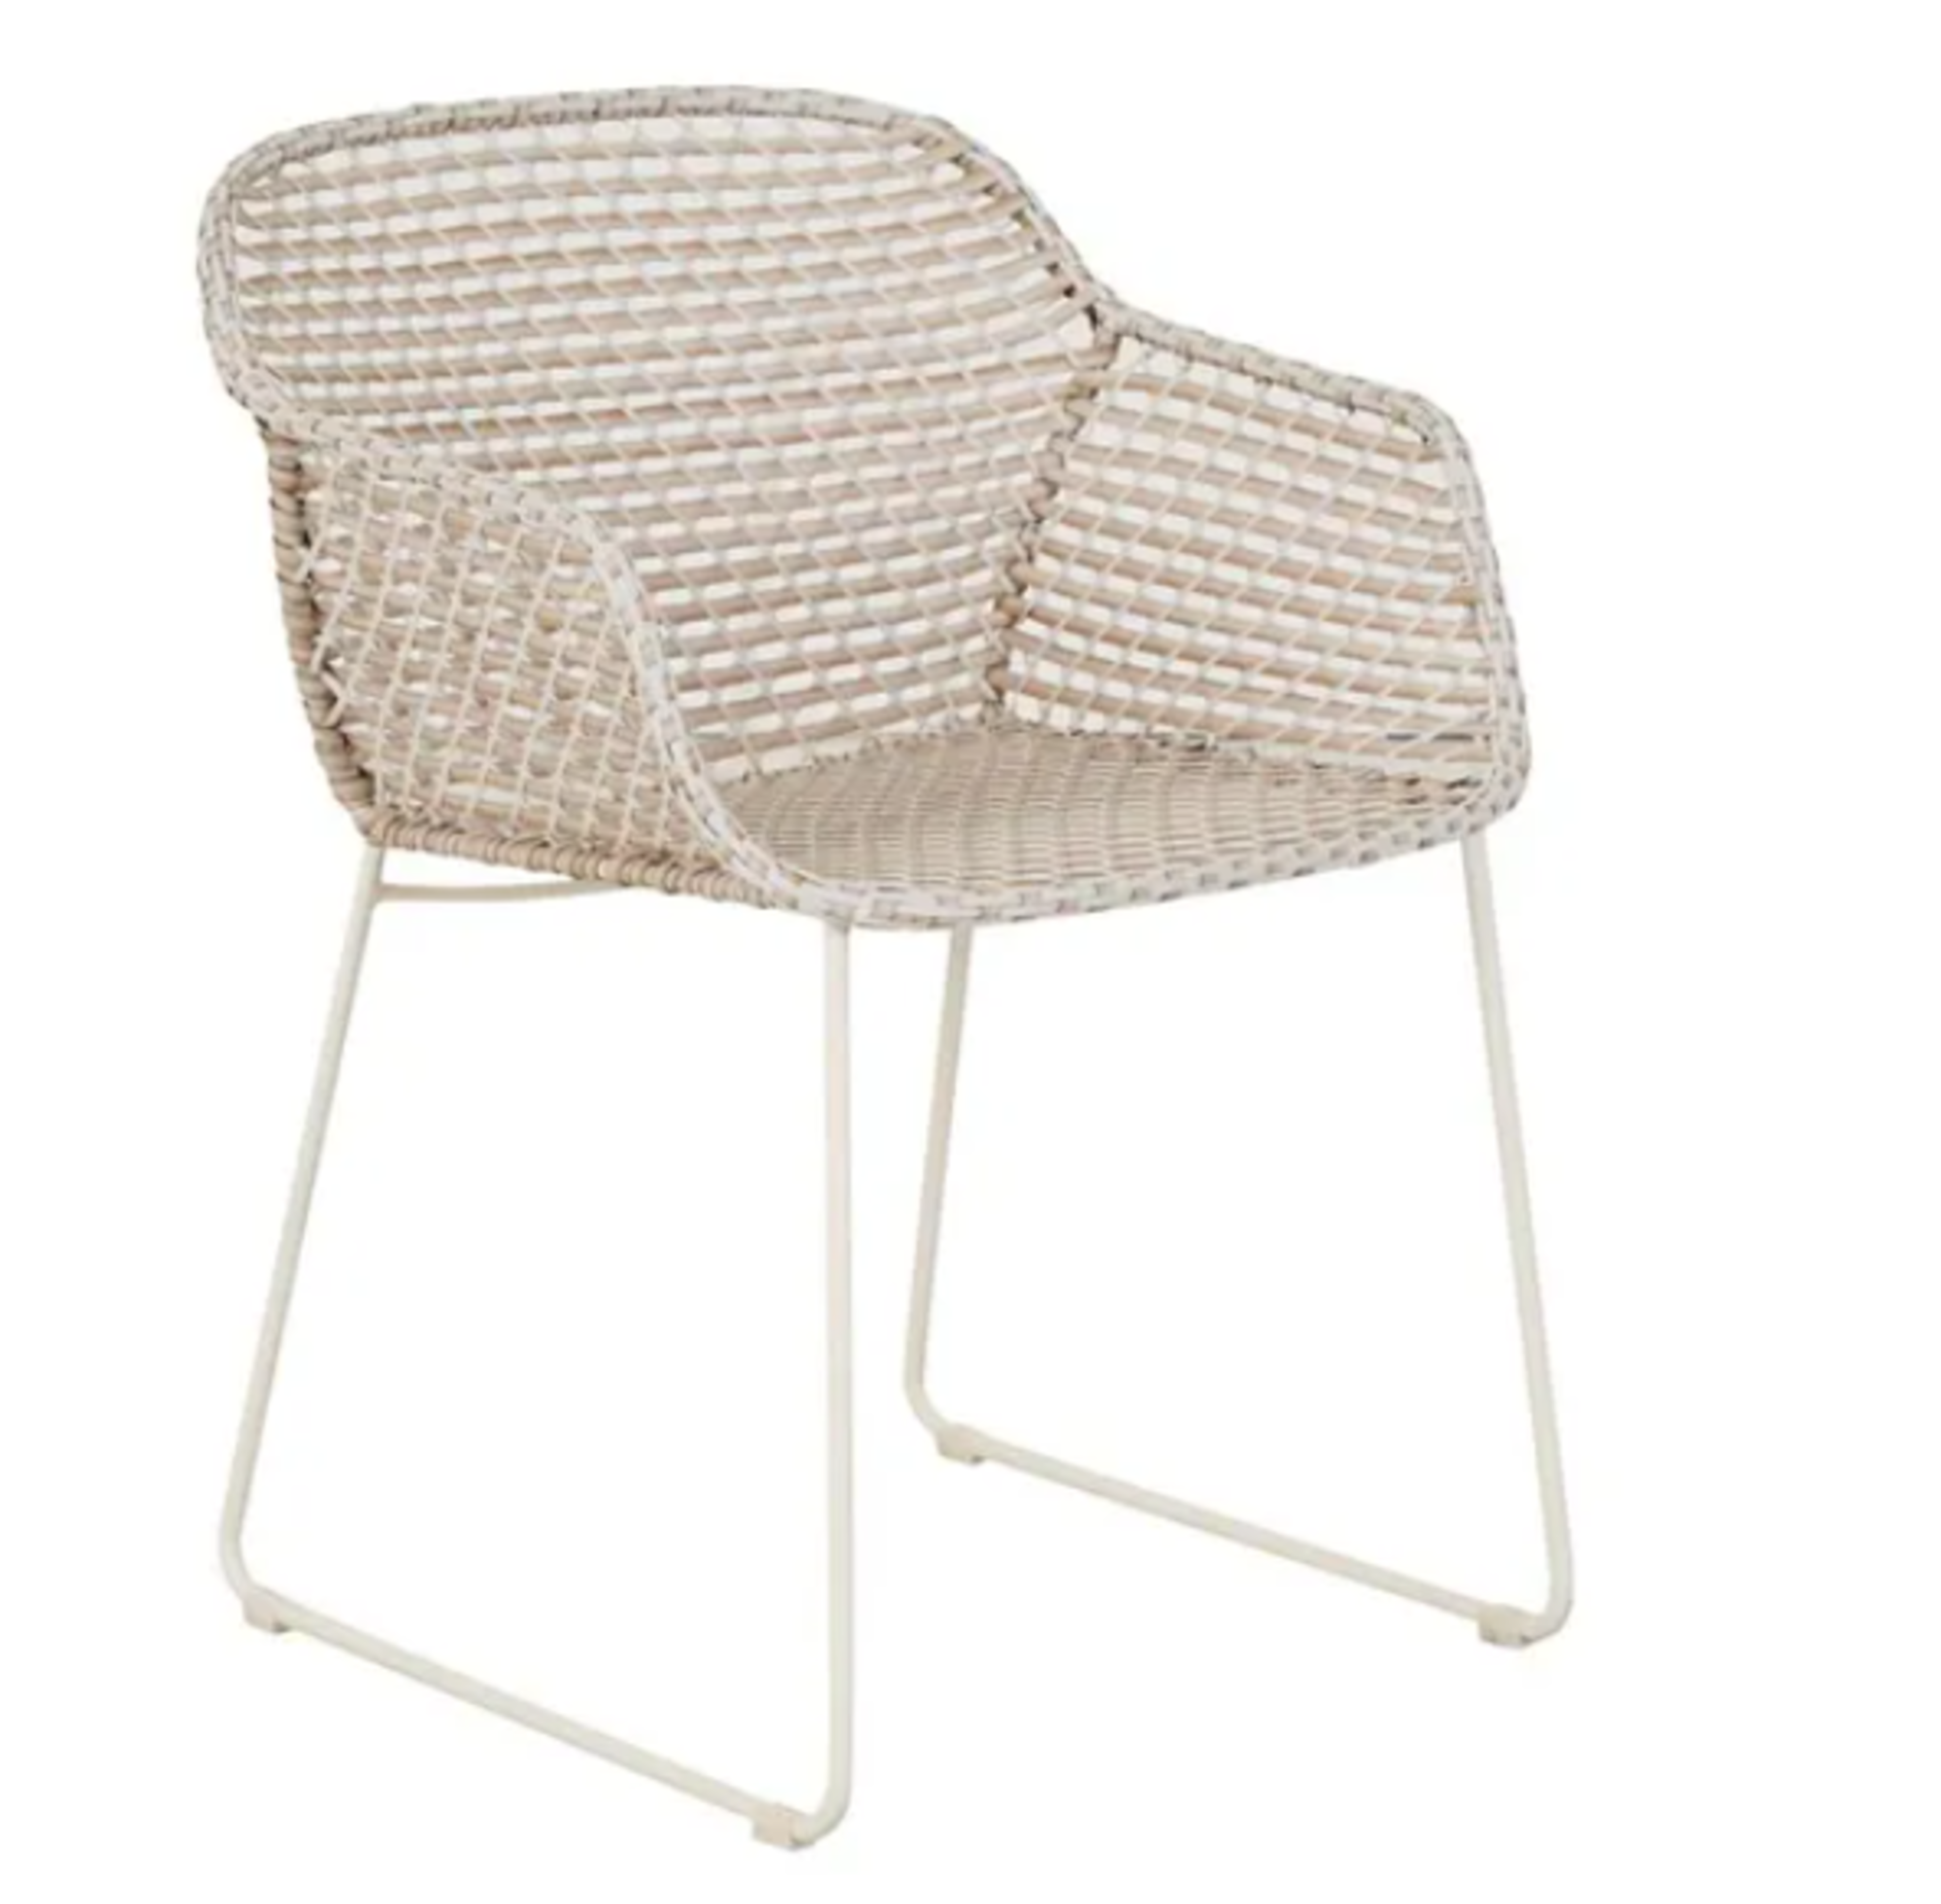 Cabana Link Arm Chair (Outdoor) image 7